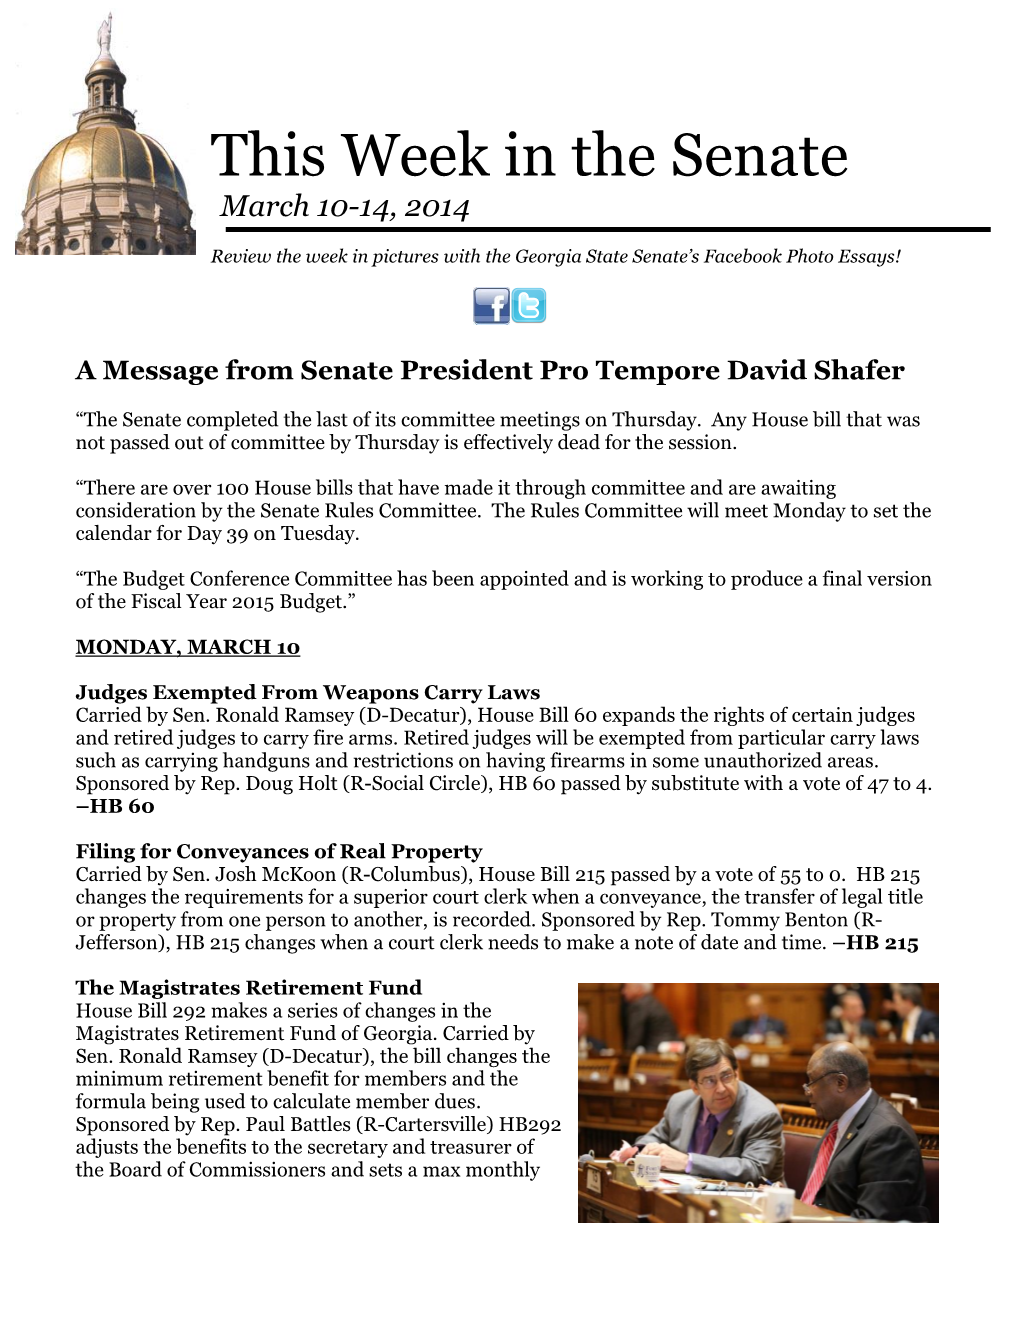 This Week in the Senate March 10-14, 2014